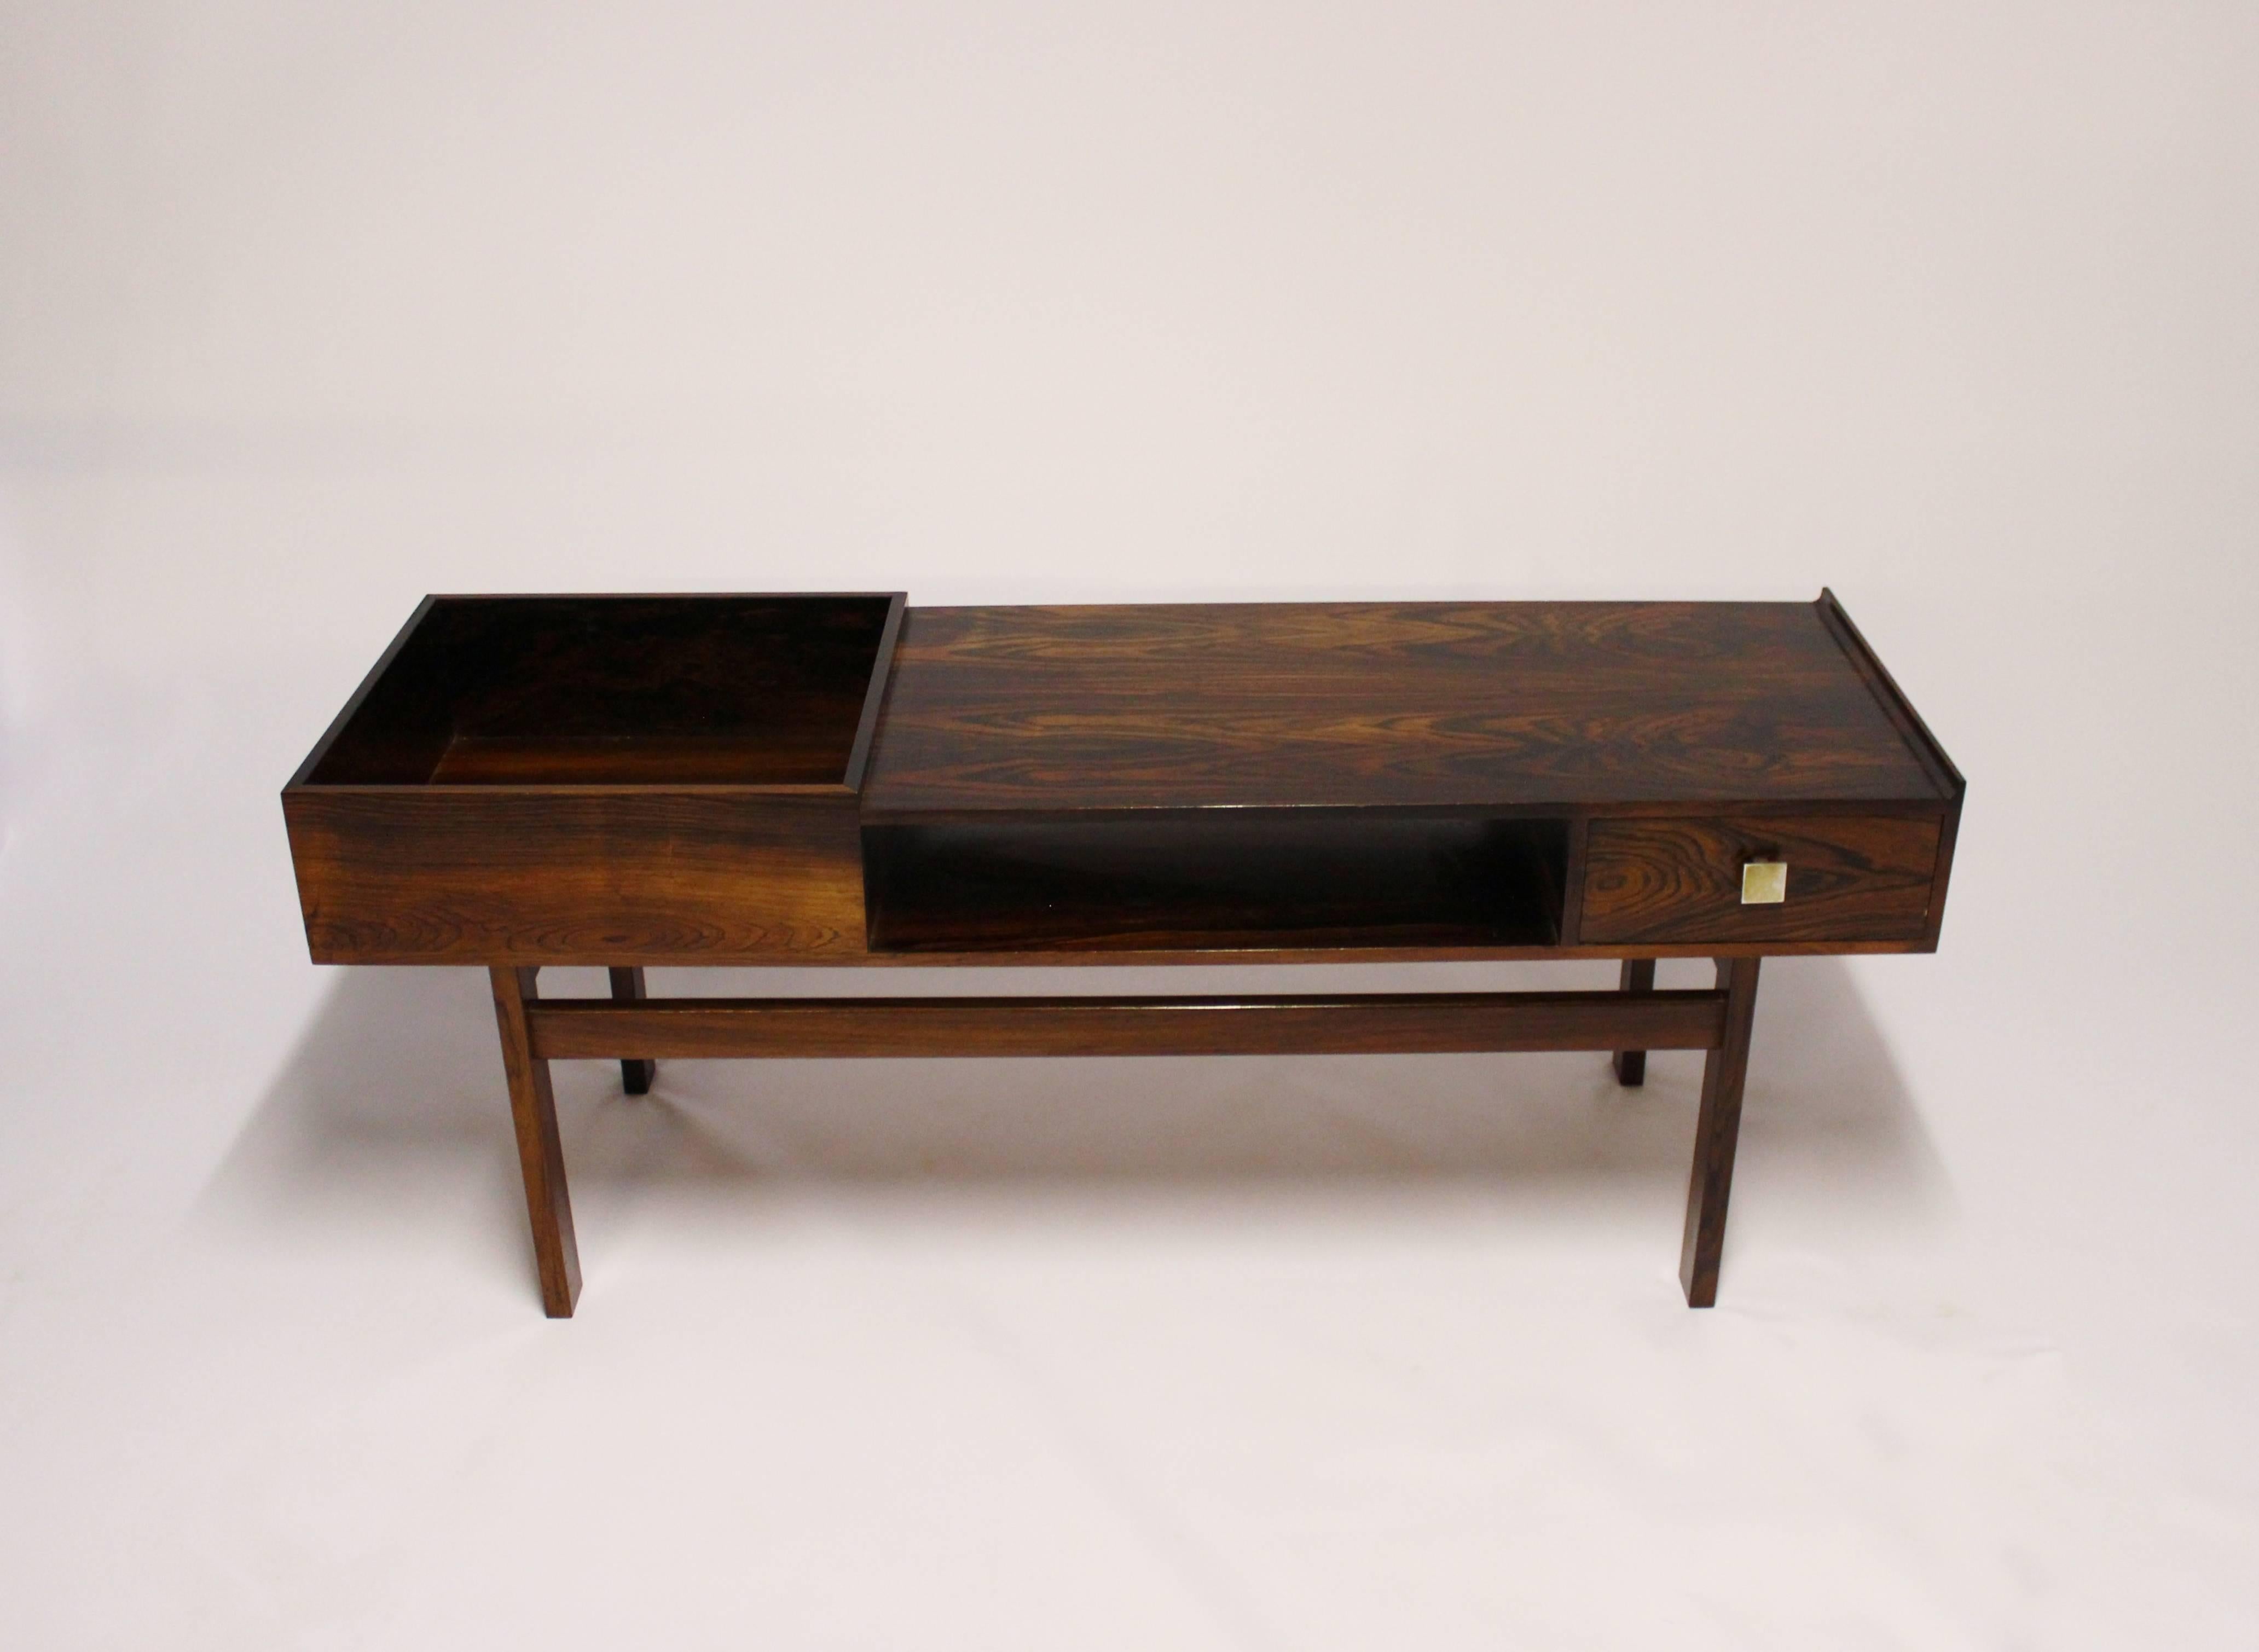 Low sideboard in rosewood with drawer, of Danish design from the 1960s. The sideboard is in great vintage condition.